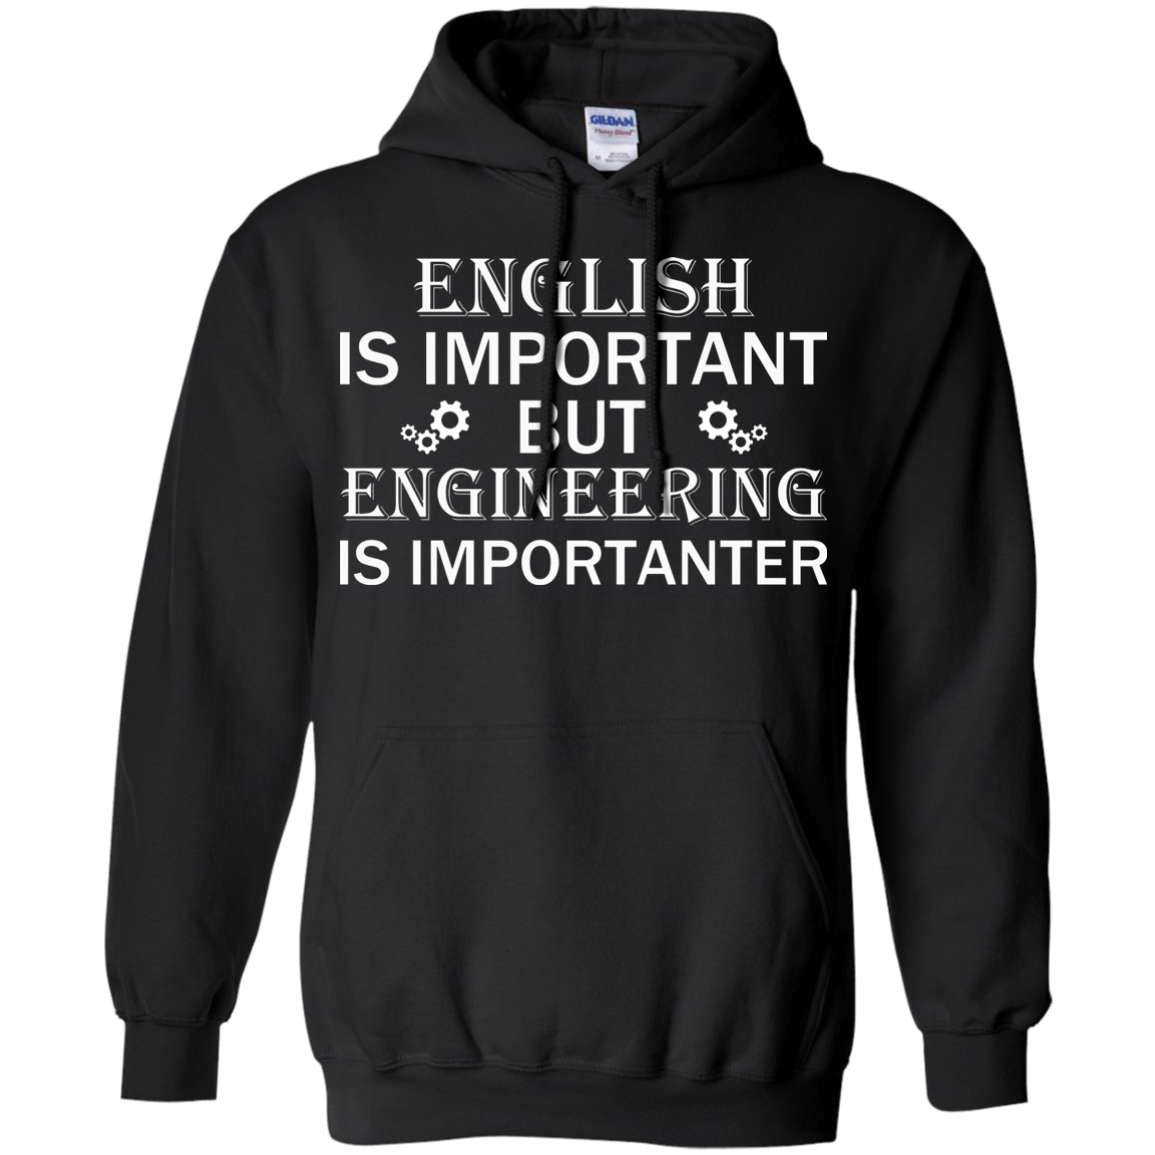 English Is Important, But Engineering Is Importanter